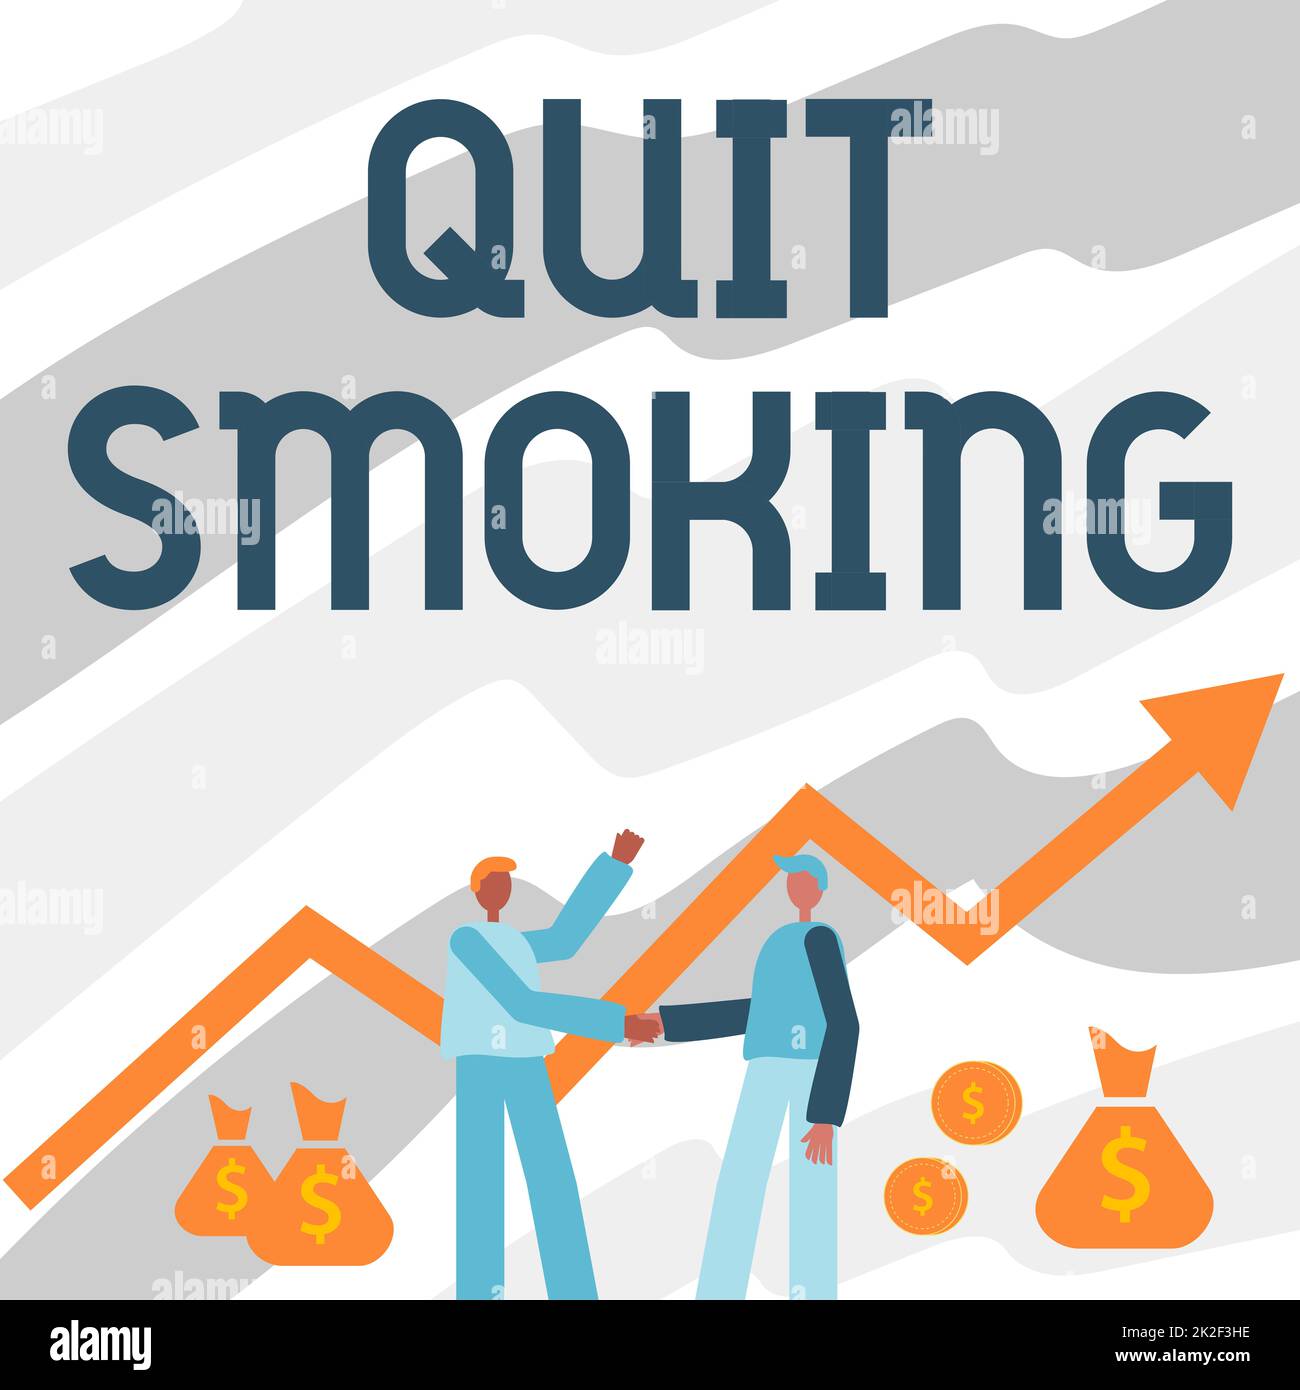 Hand writing sign Quit Smoking. Concept meaning process of discontinuing tobacco and any other smokers Two Men Standing Shaking Hands With Financial Arrow For Growth And Money Bags. Stock Photo